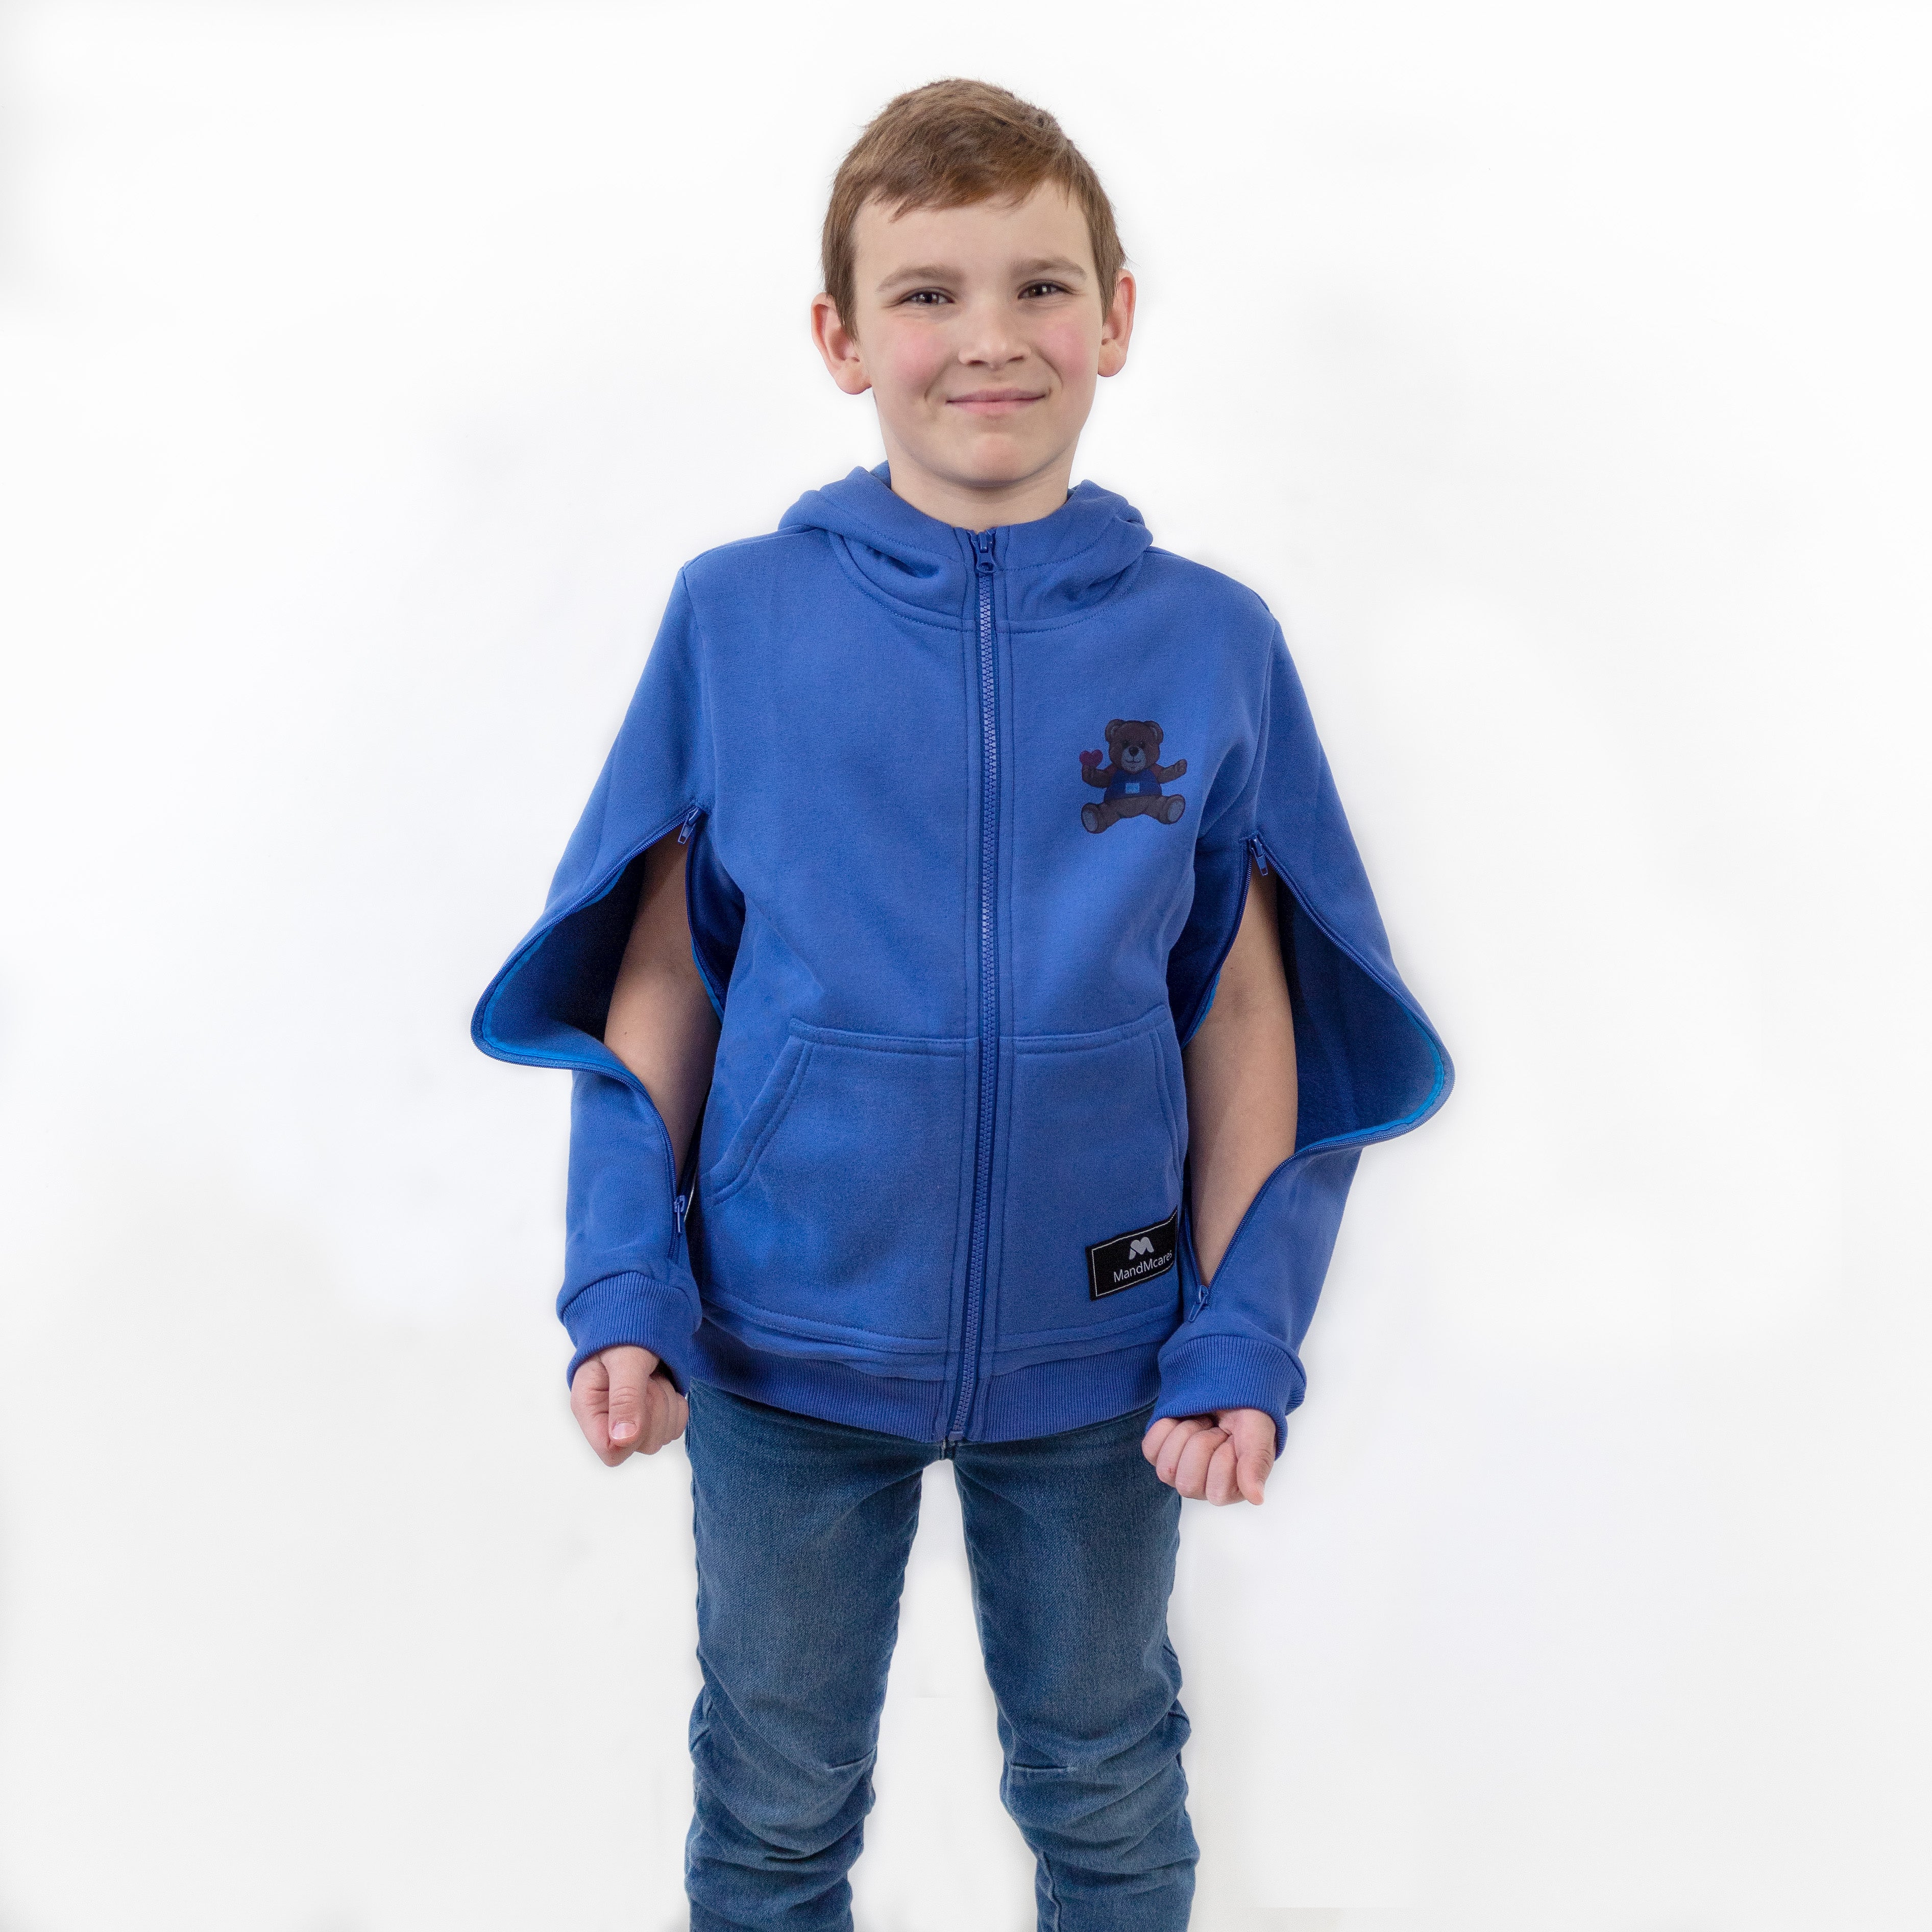 Children's Customized Hoodies for Chemotherapy, Hemodialysis and Infusion Treatments